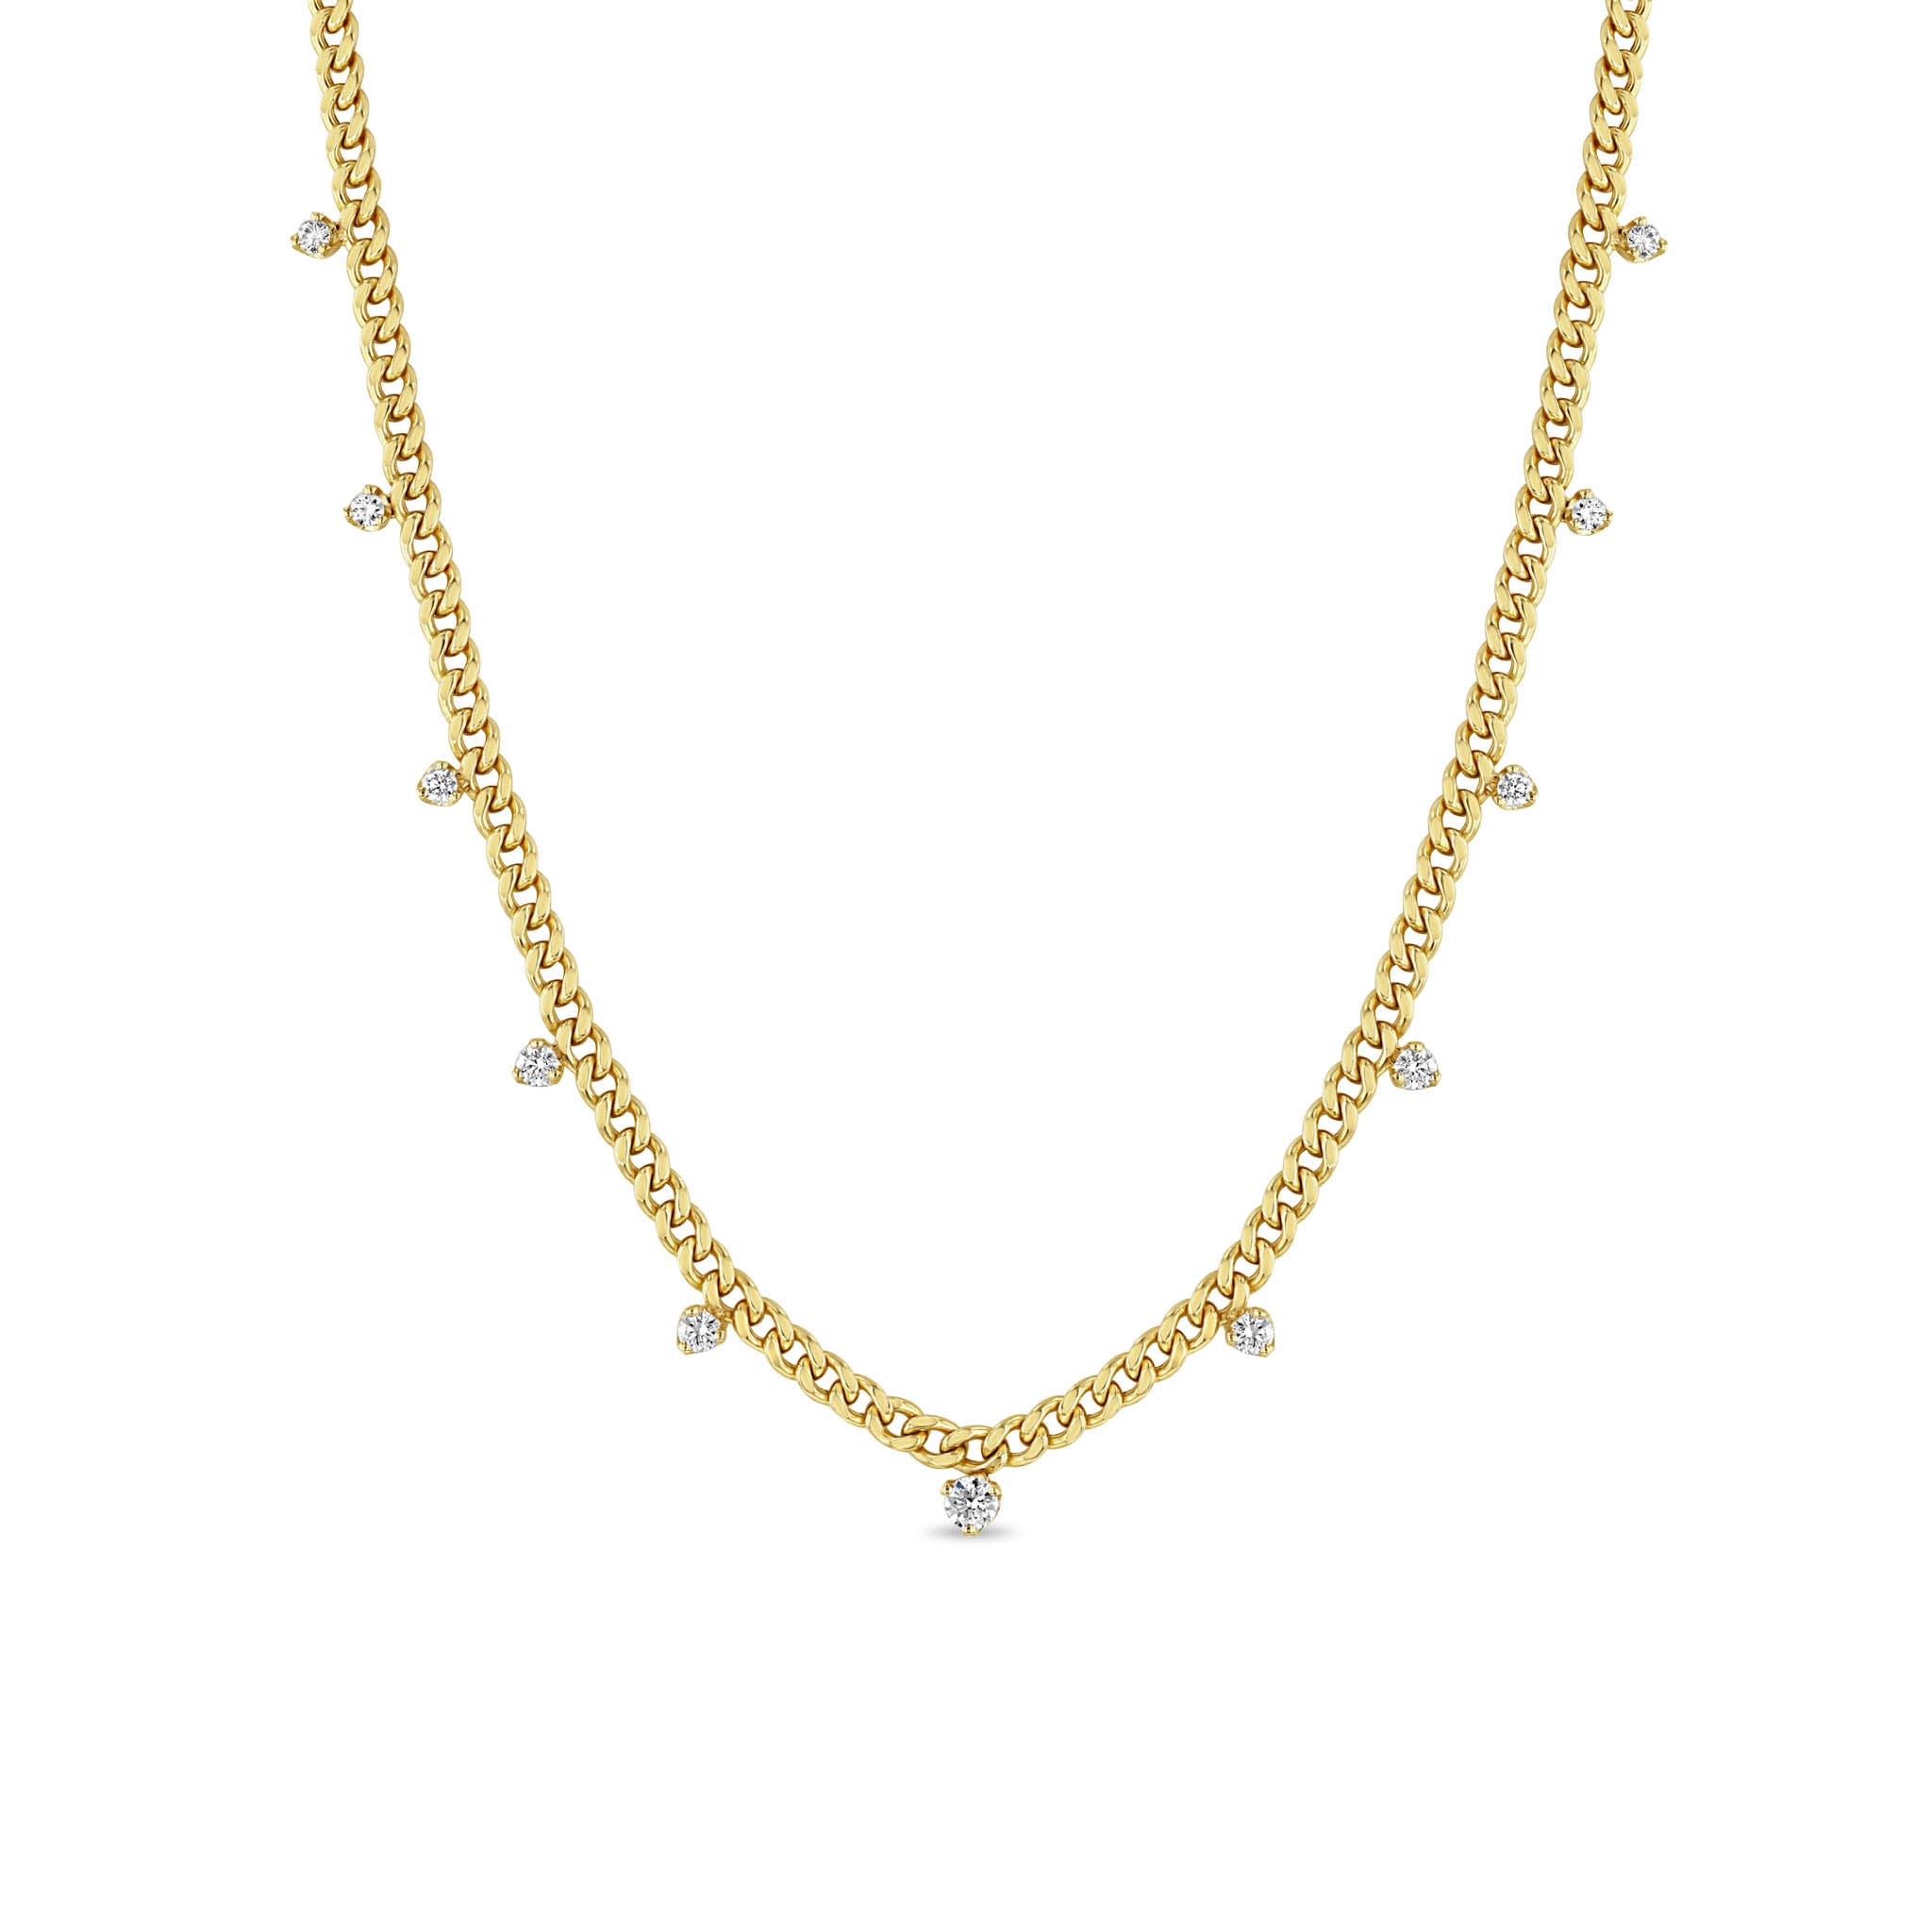 Small Curb Chain Necklace with 11 Graduating Prong Set Diamonds